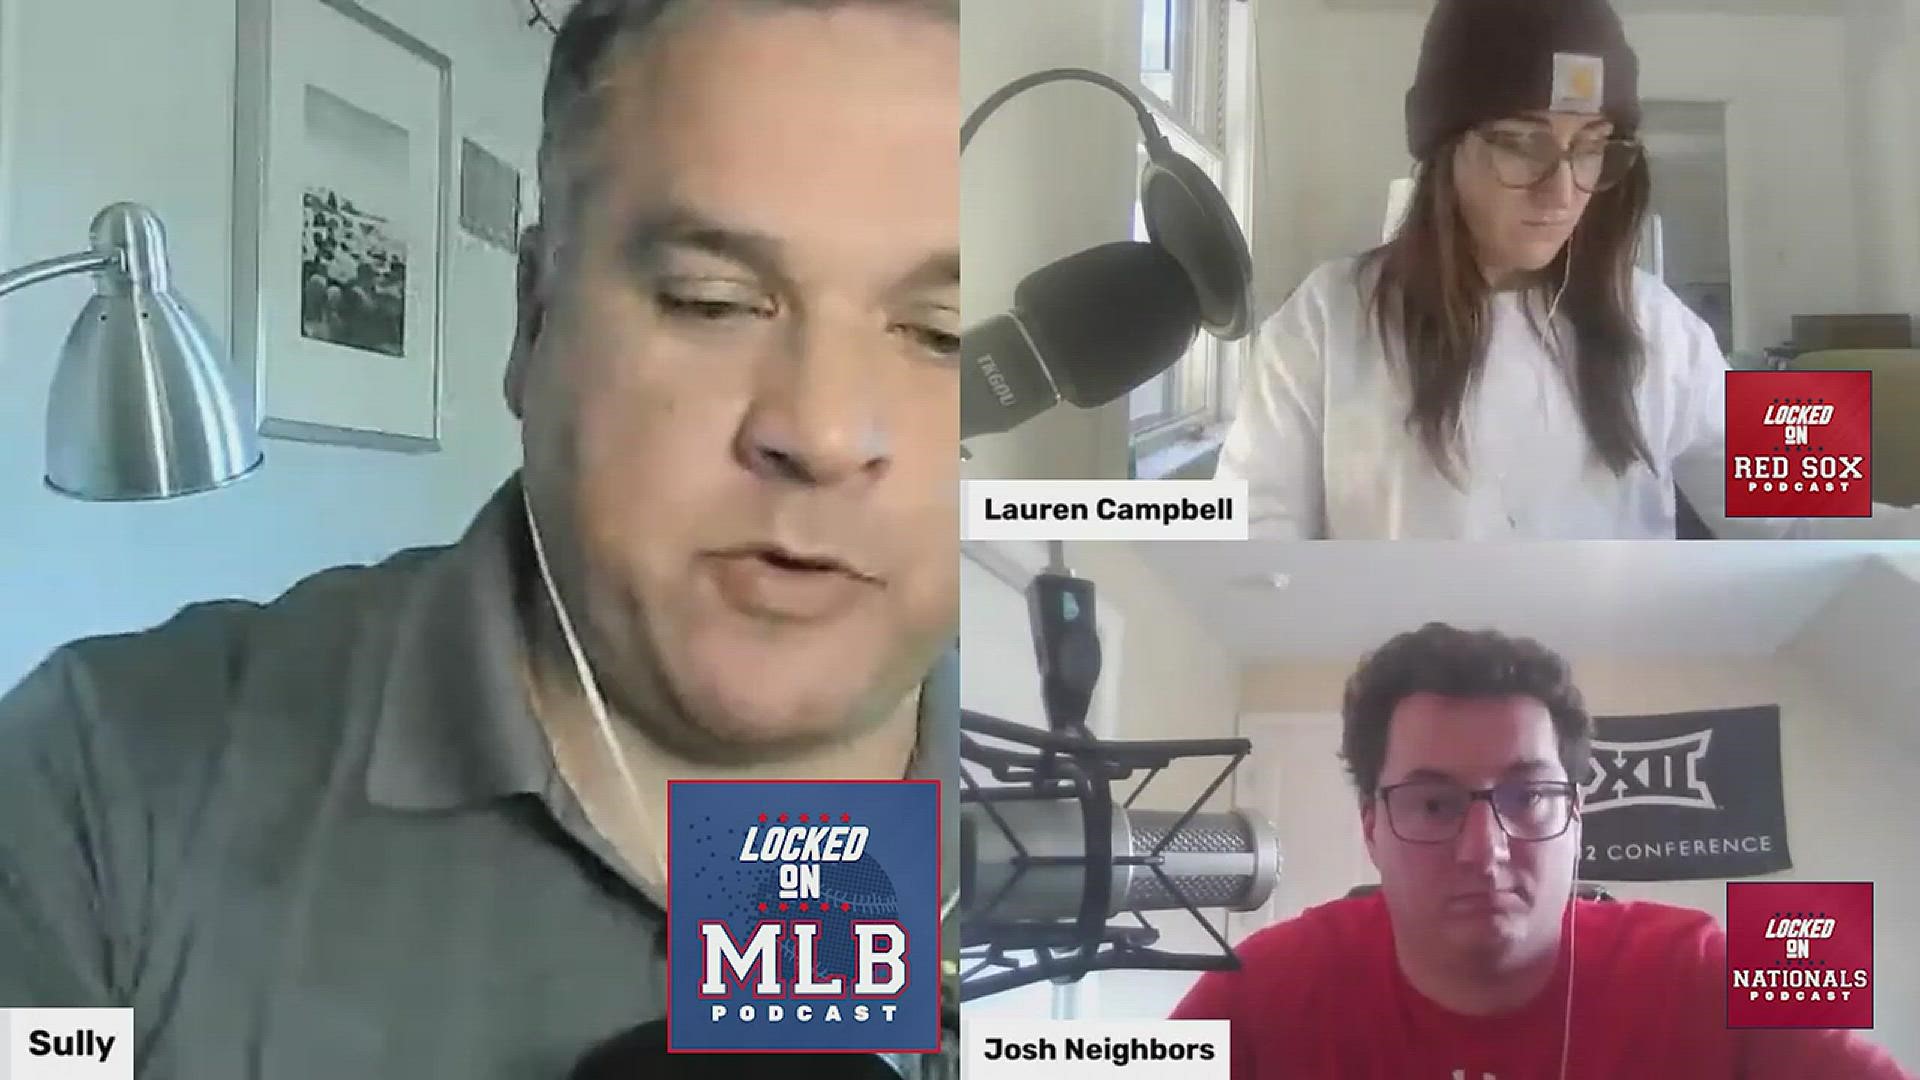 Is baseball season sure to be delayed? On the Locked On MLB podcast, several Locked On podcast hosts discuss baseball's immediate future.